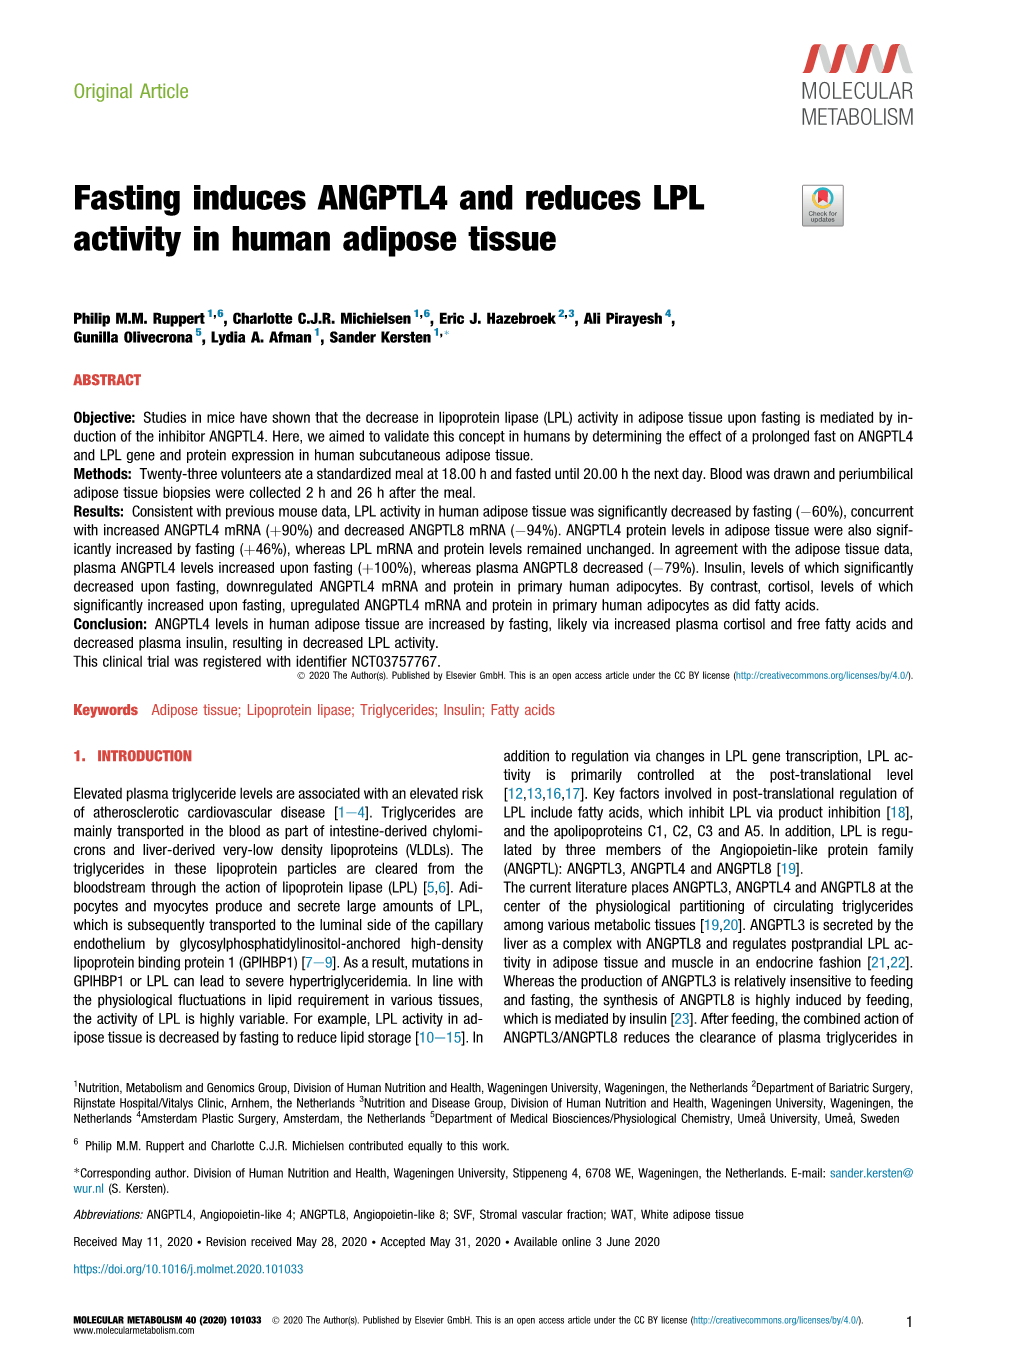 Fasting Induces ANGPTL4 and Reduces LPL Activity in Human Adipose Tissue